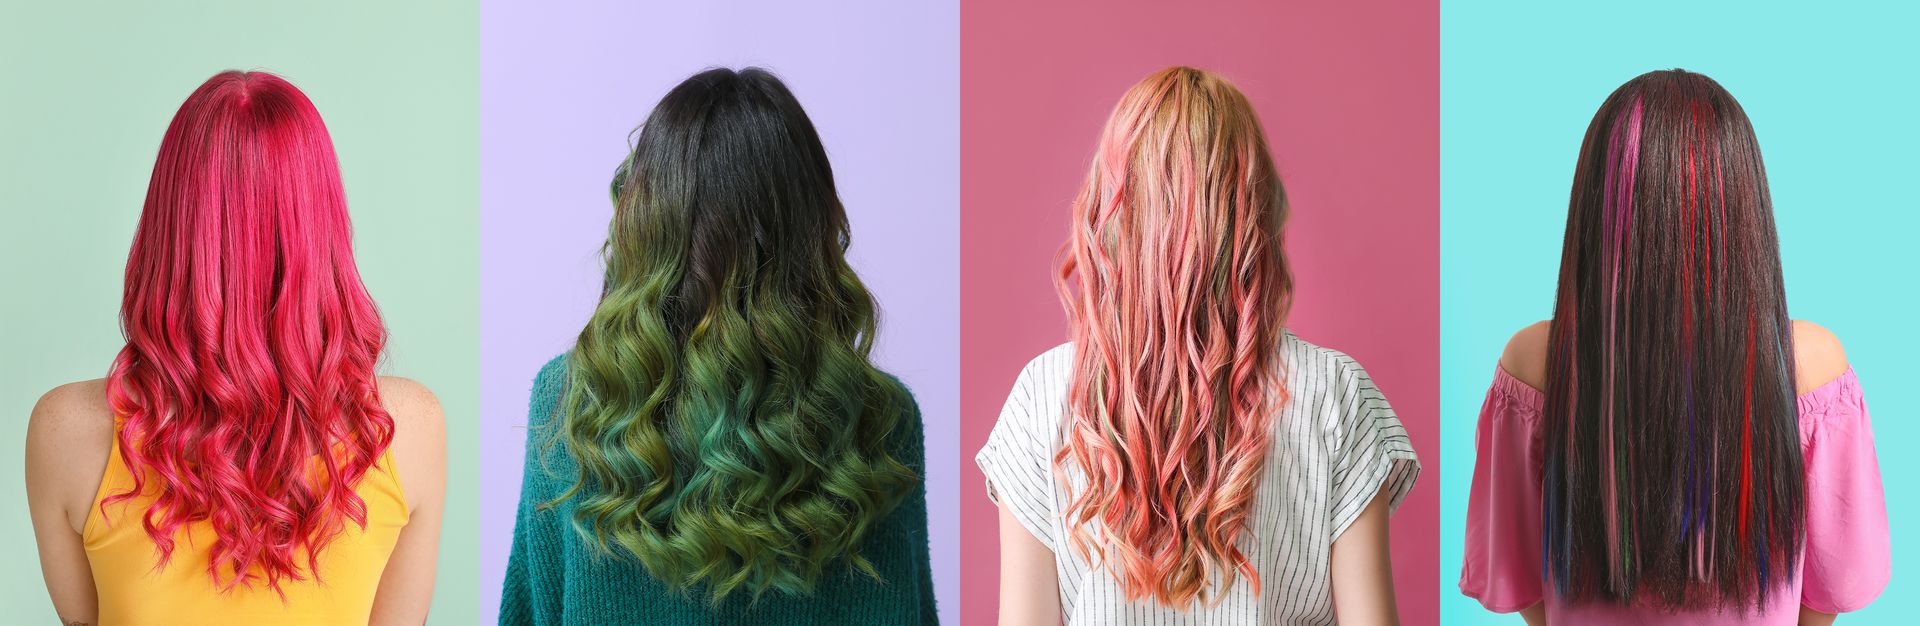 Different hair dye colors